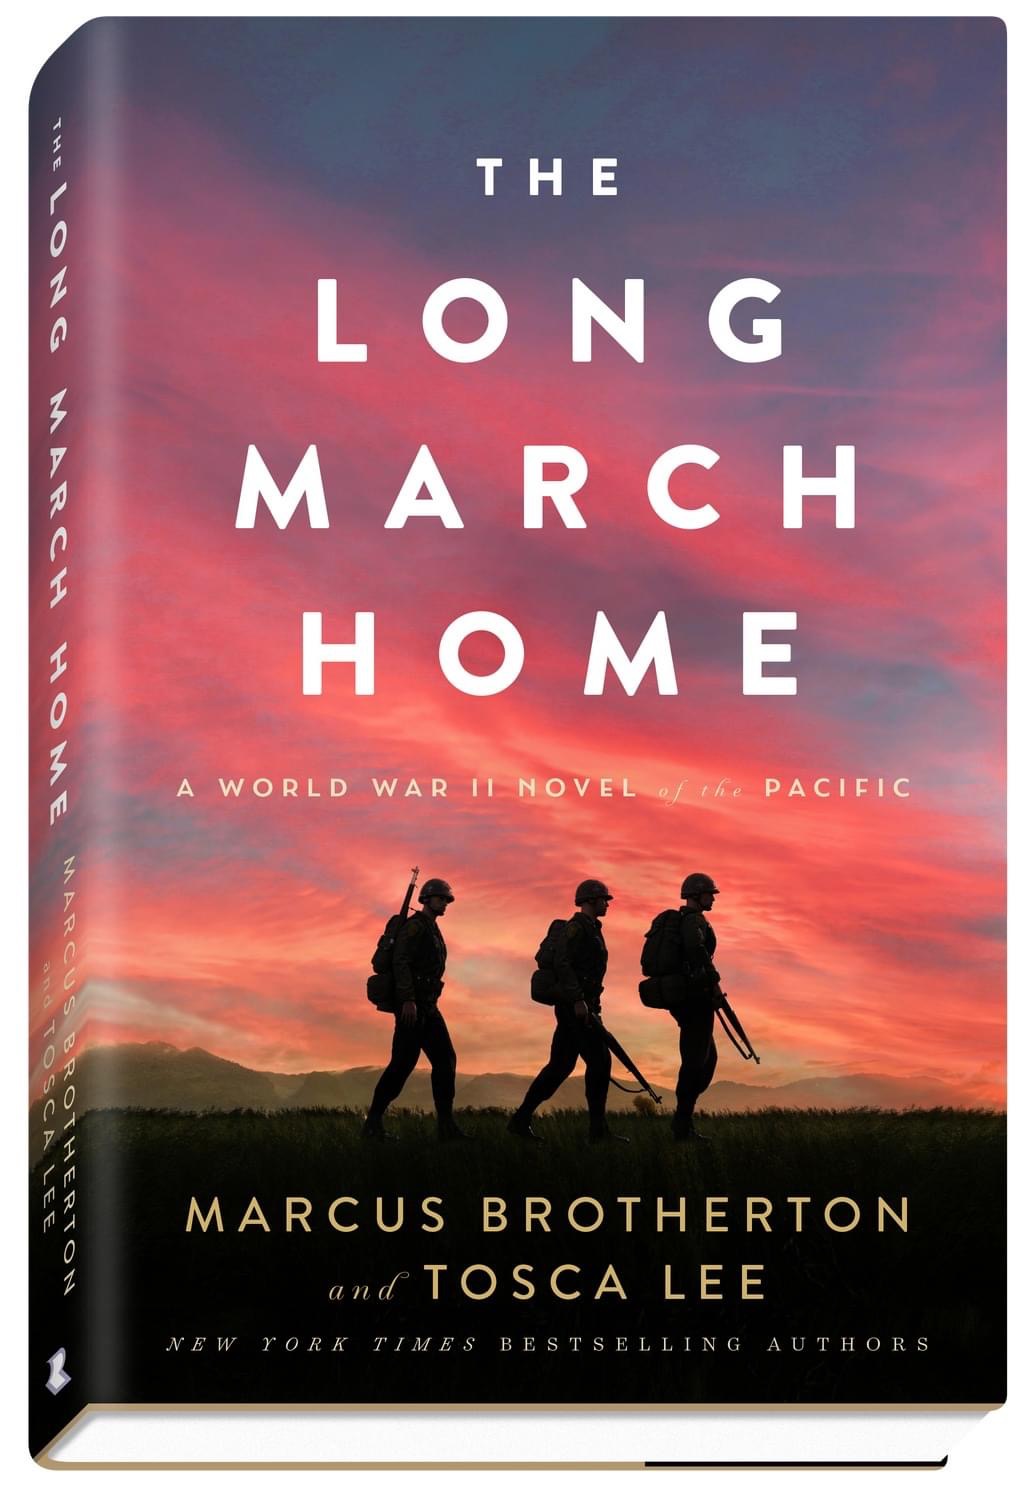 Coauthoring A Novel
The Long March home, written by Tosca Lee and Marcus Brotherton